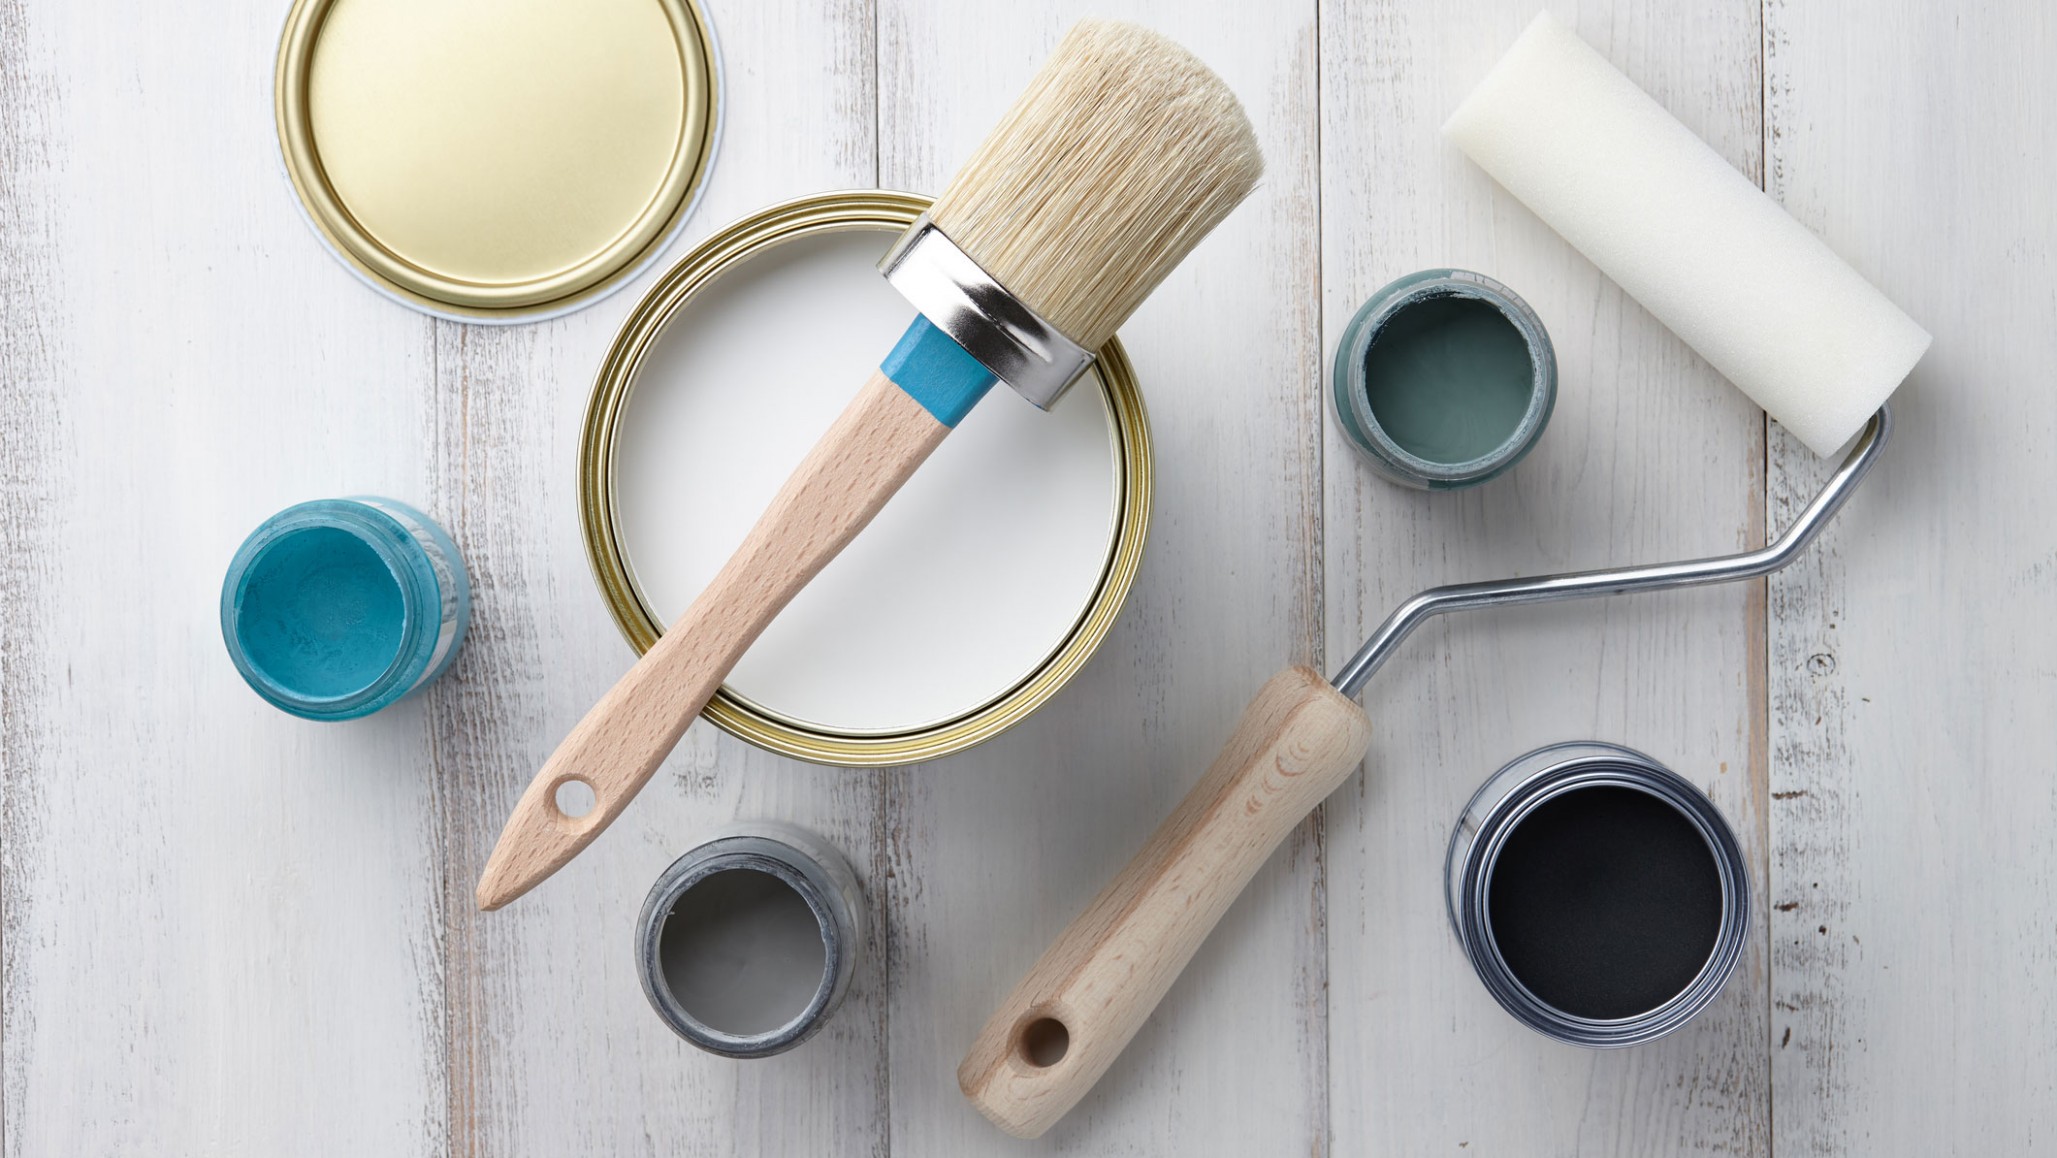 Chalk Paint: The Secret To The Easiest Diy Job Ever? | Realtor